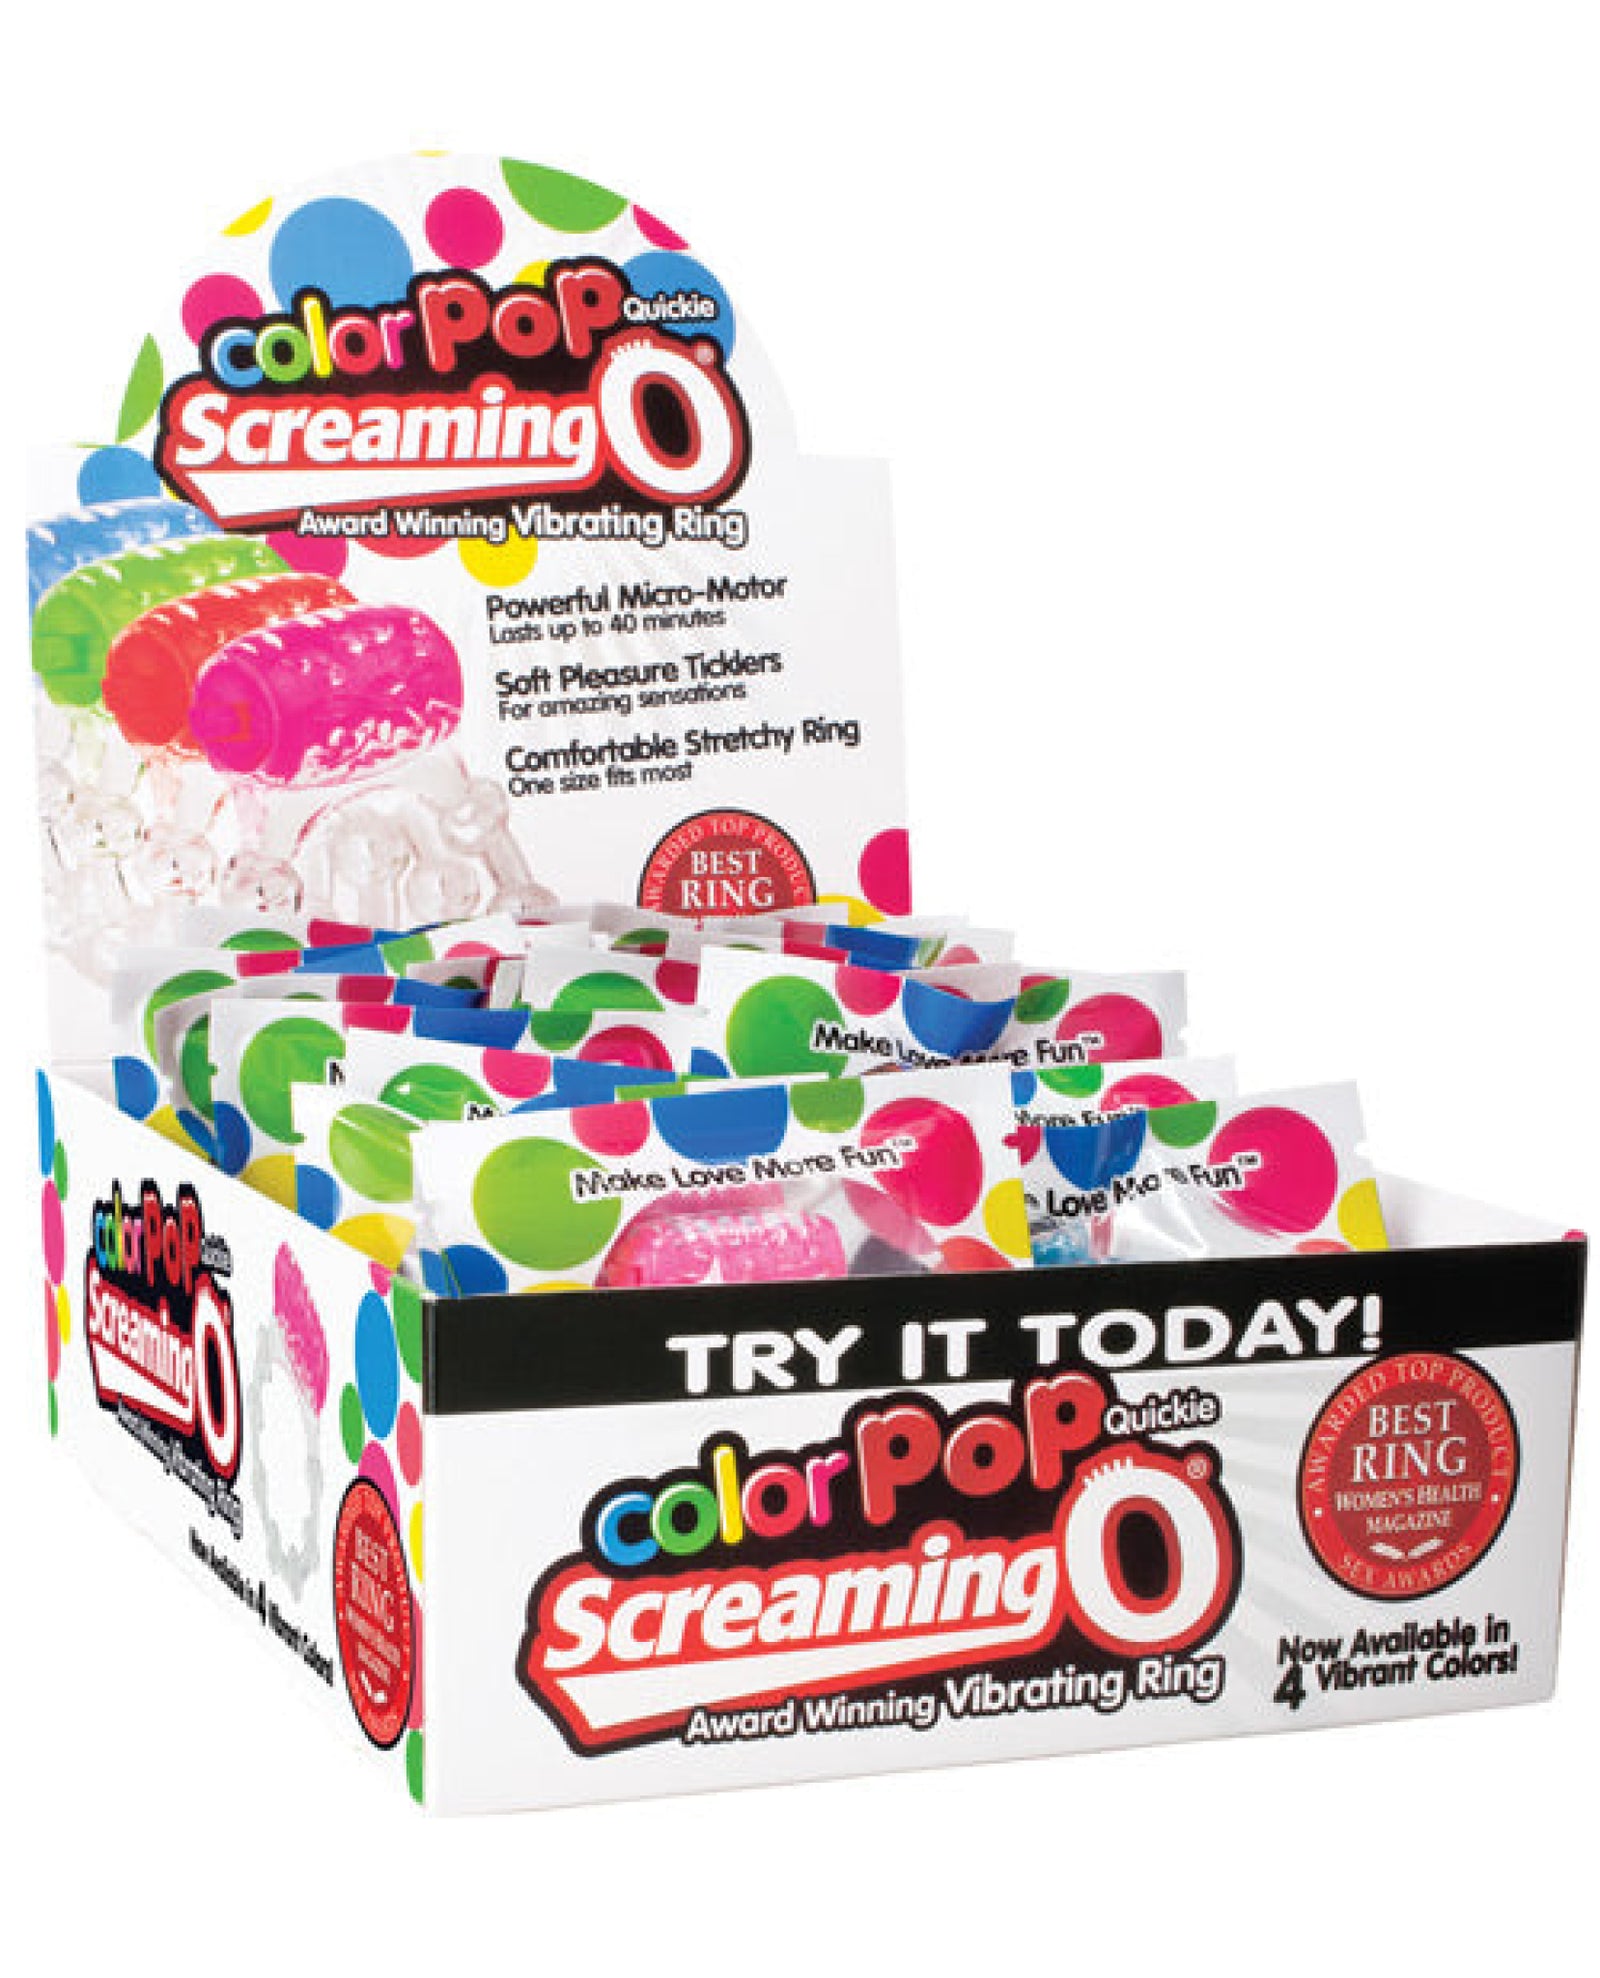 Screaming O Color Pop Quickie - Asst. Colors Box Of 24 Screaming O